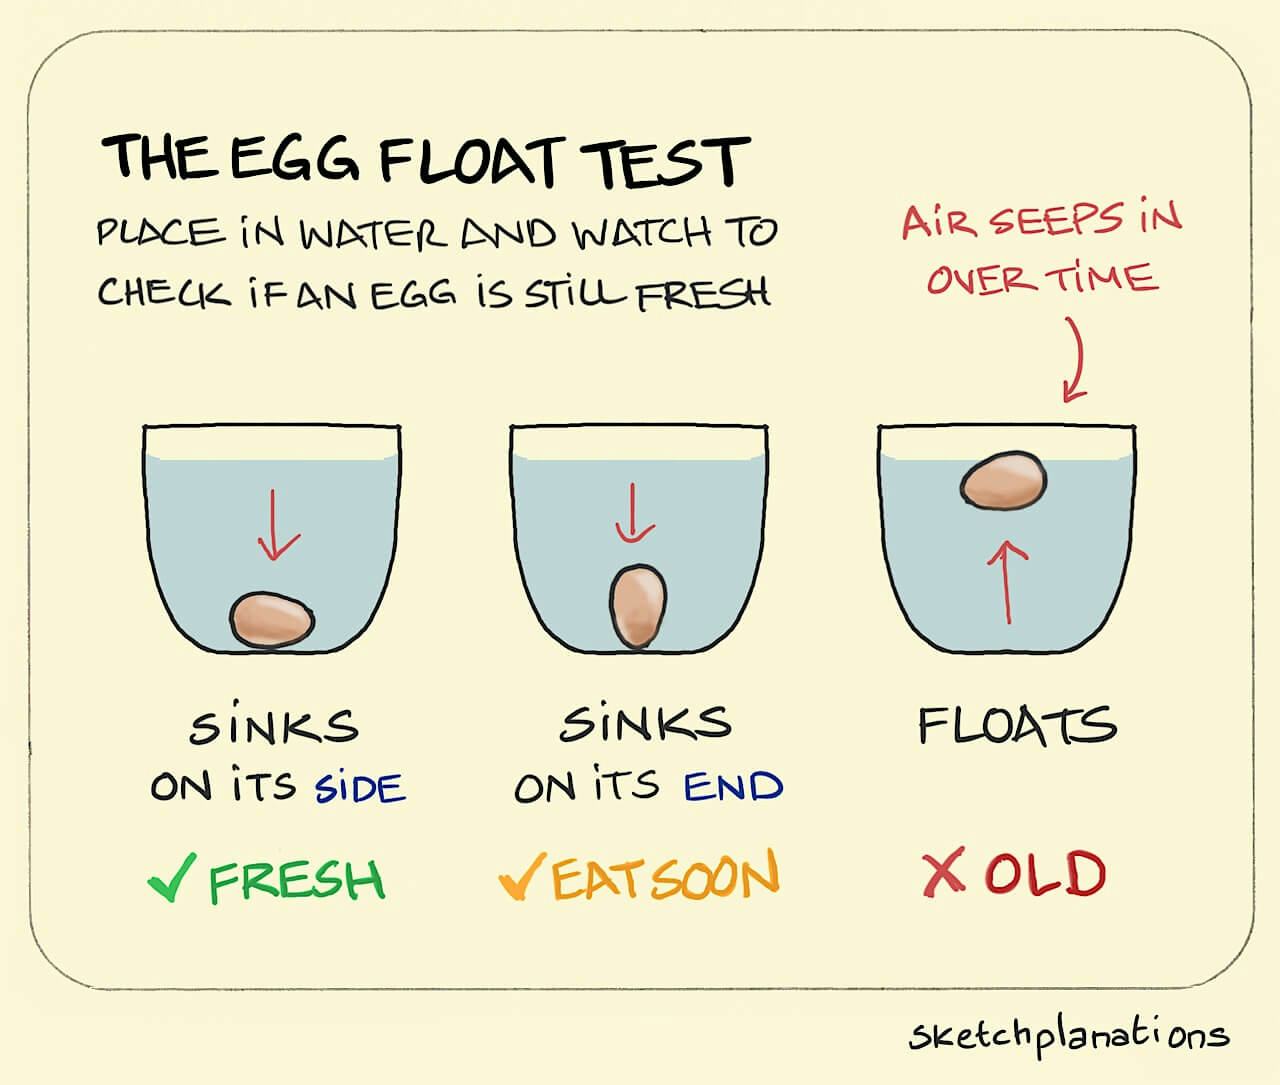 Egg test: how to use the egg float test to know if an egg has gone bad by checking it's floating behavior underwater